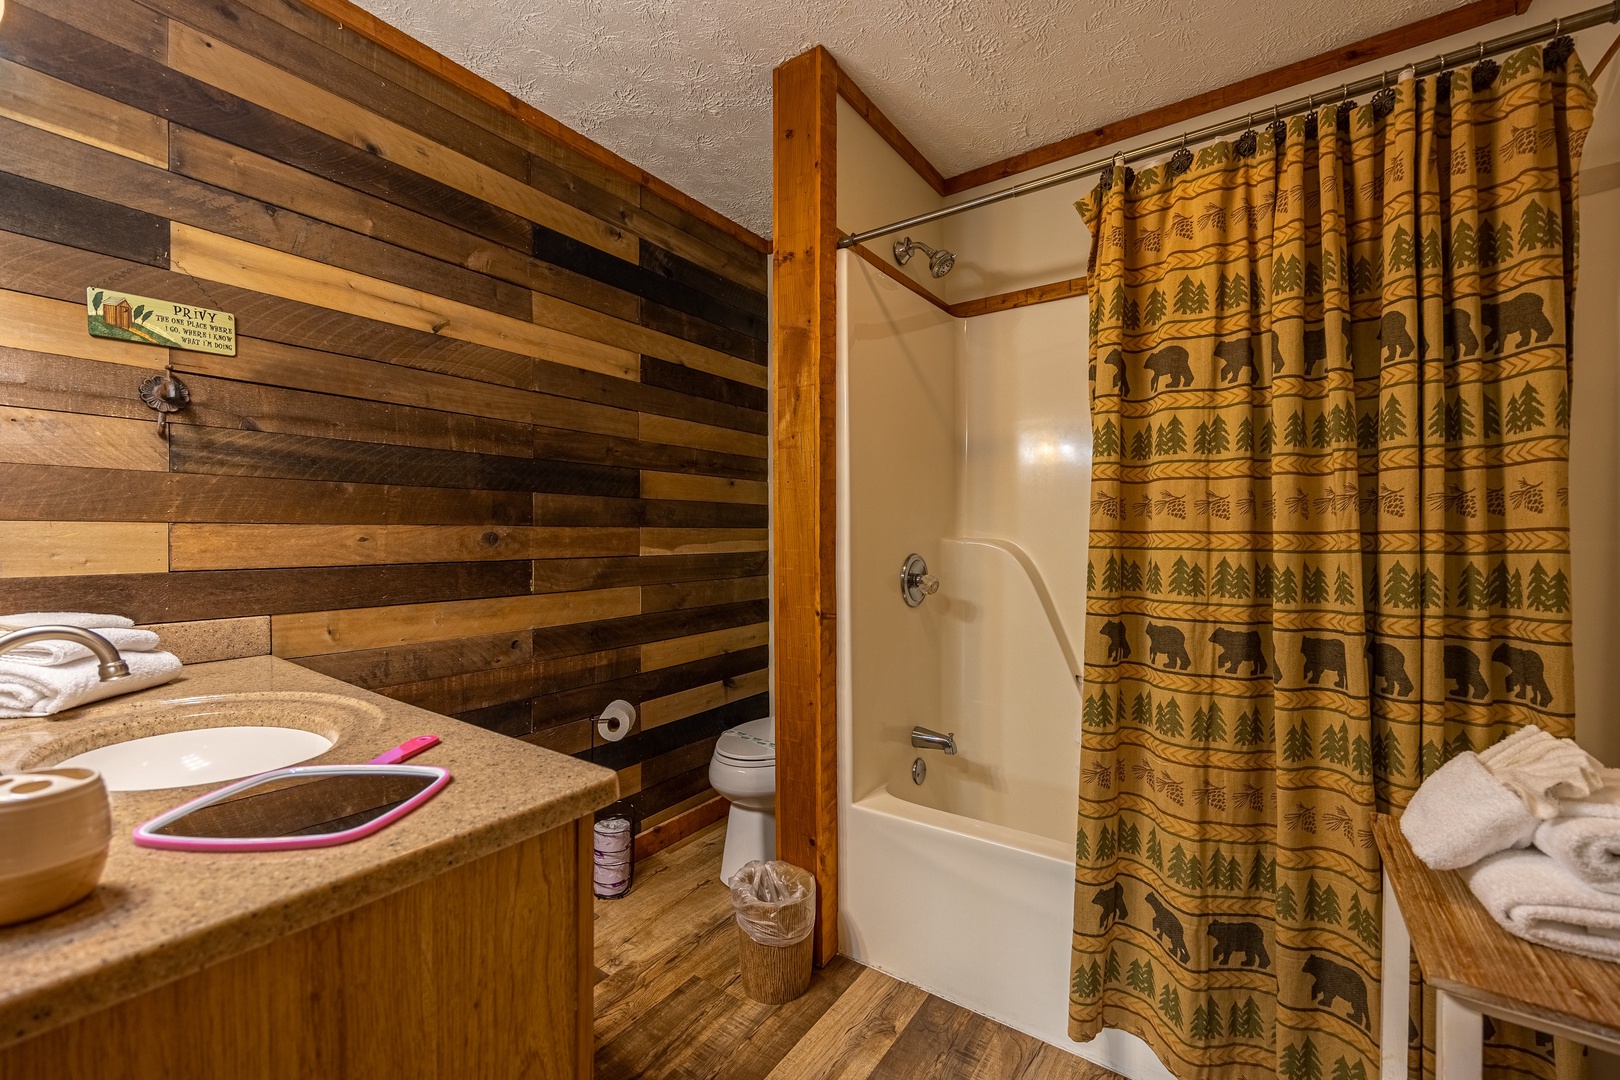 Bathroom at Cabin On The Hill, a 1 bedroom cabin rental located in Pigeon Forge